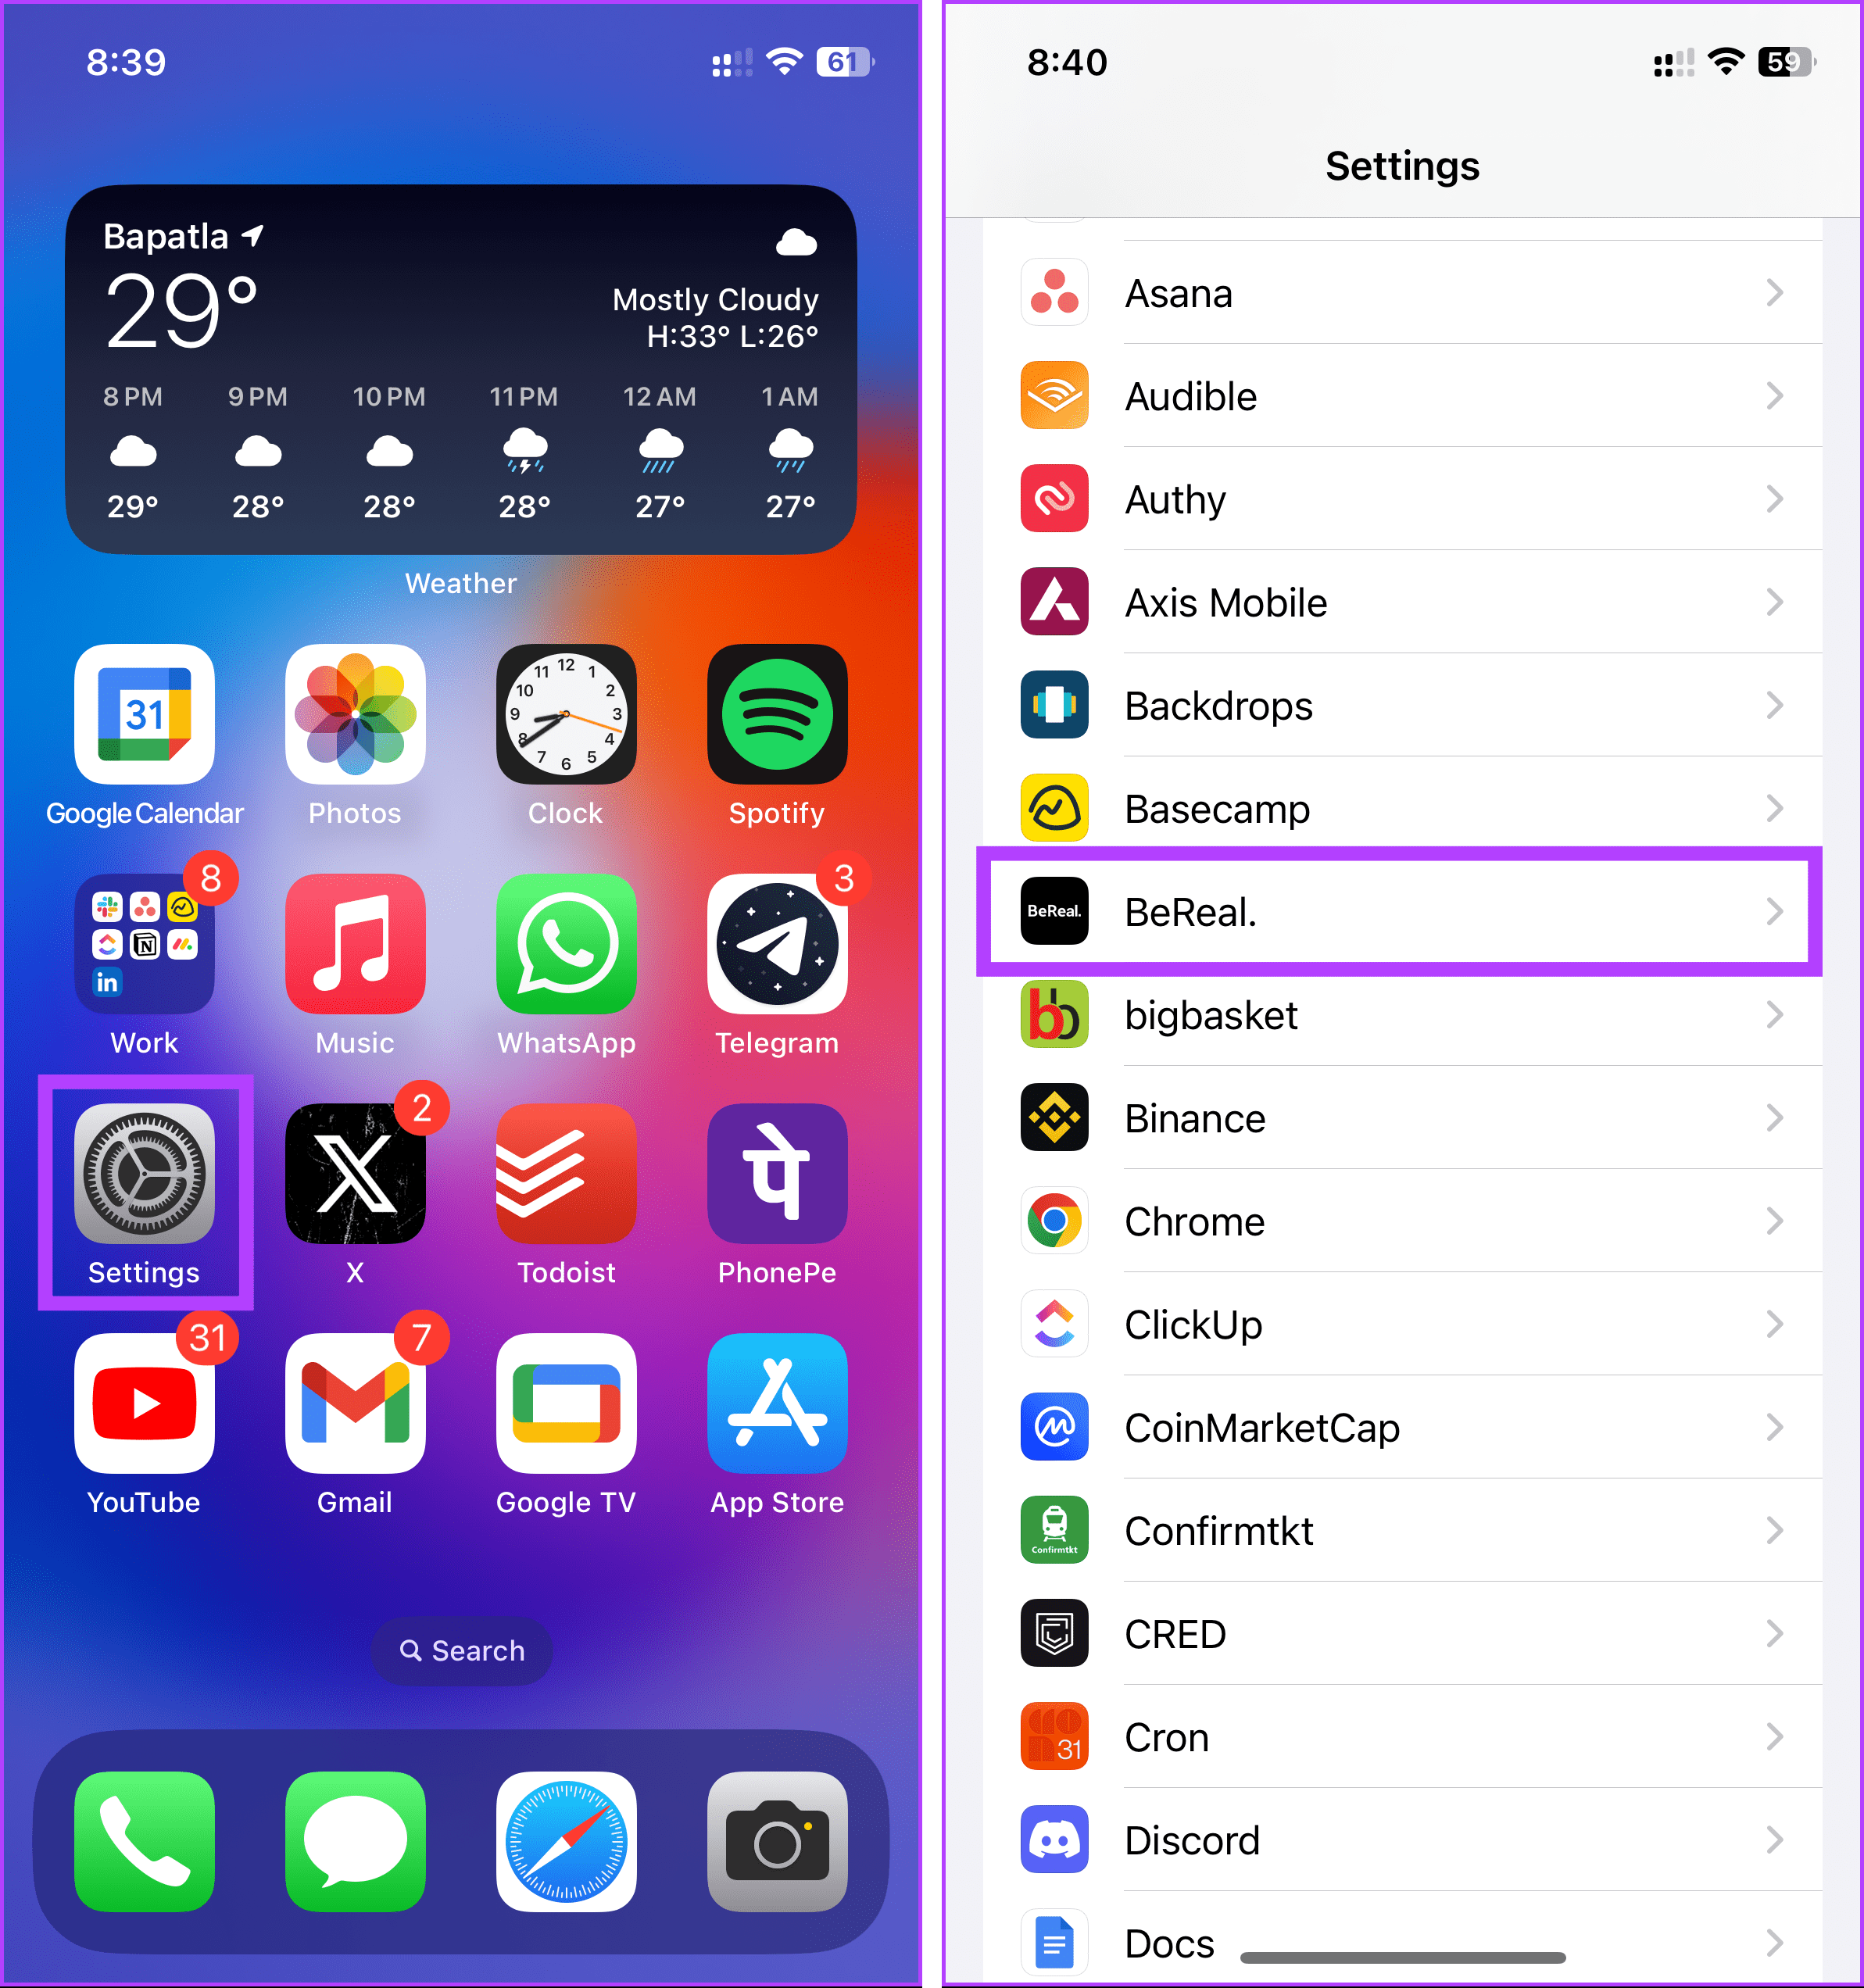 Open the Settings on your iPhone